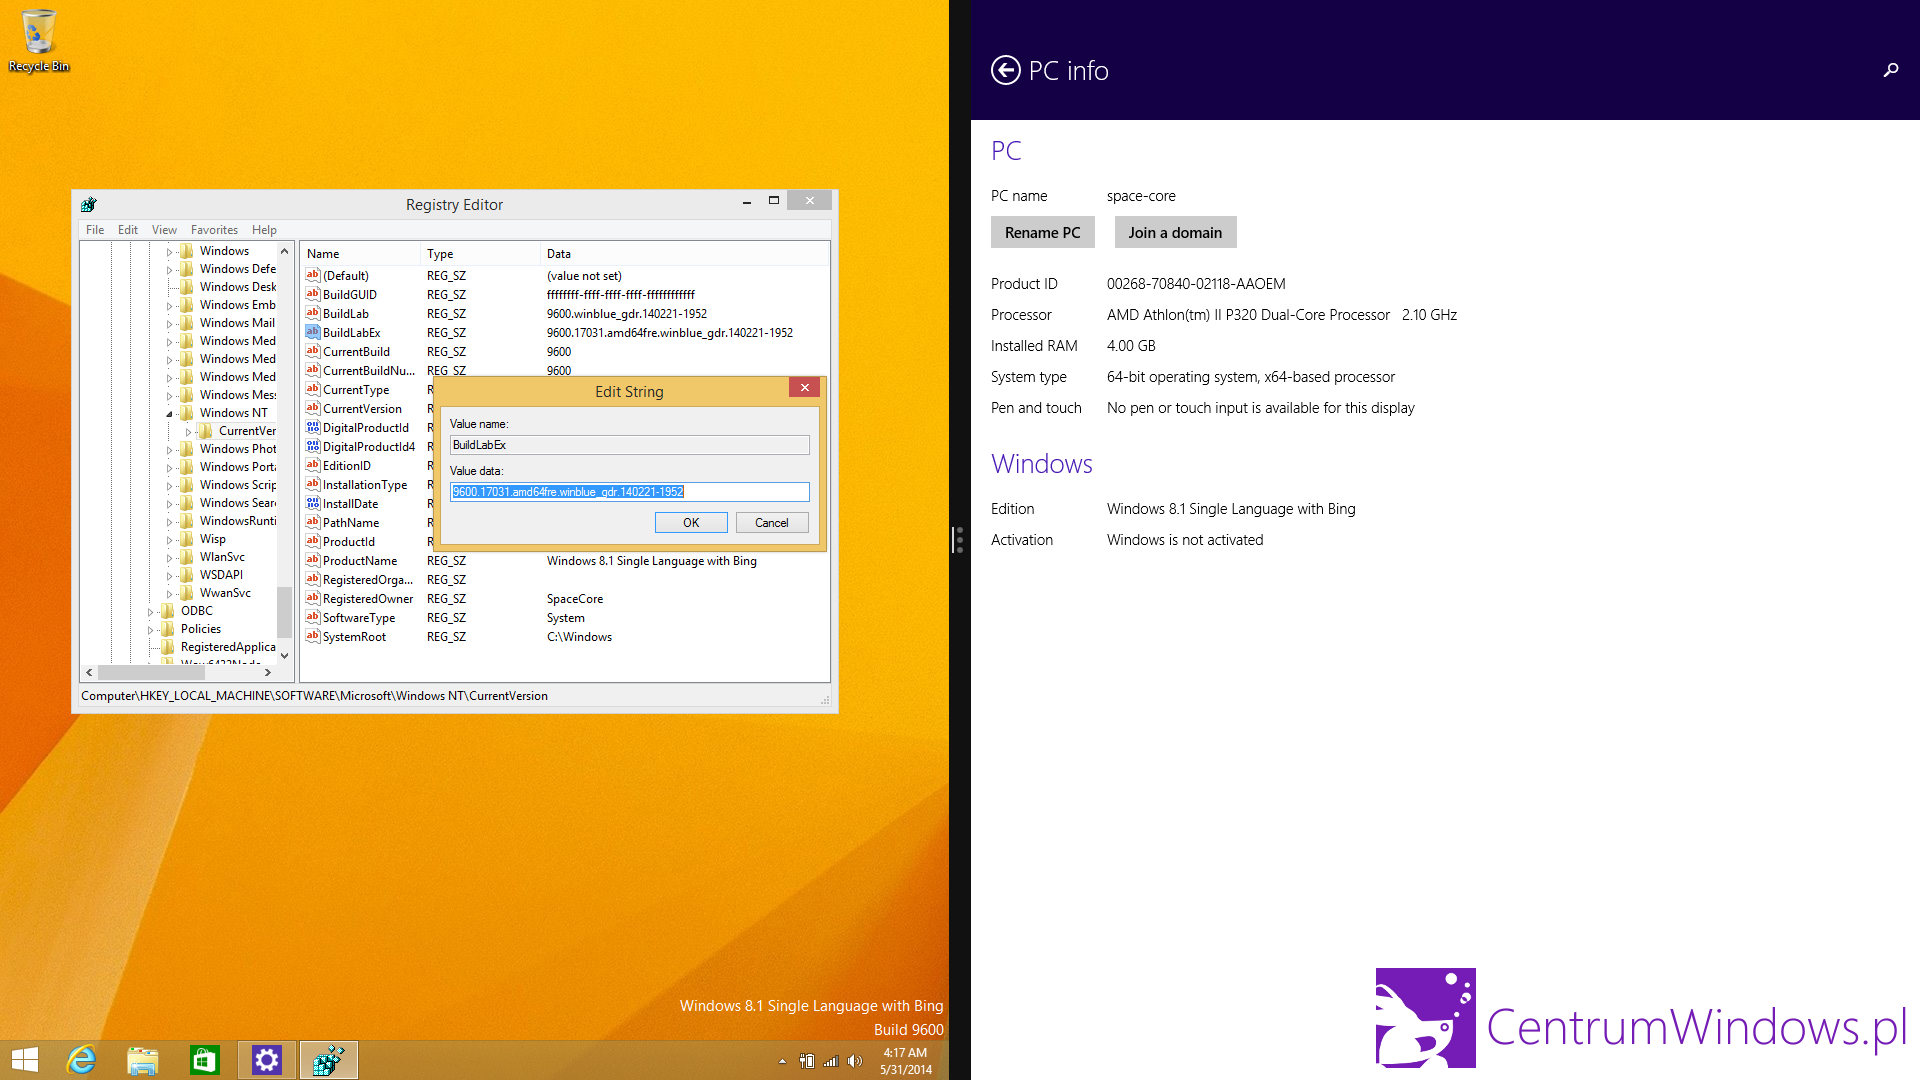 Leaked Image Shows The Low Cost Windows With Bing Sku